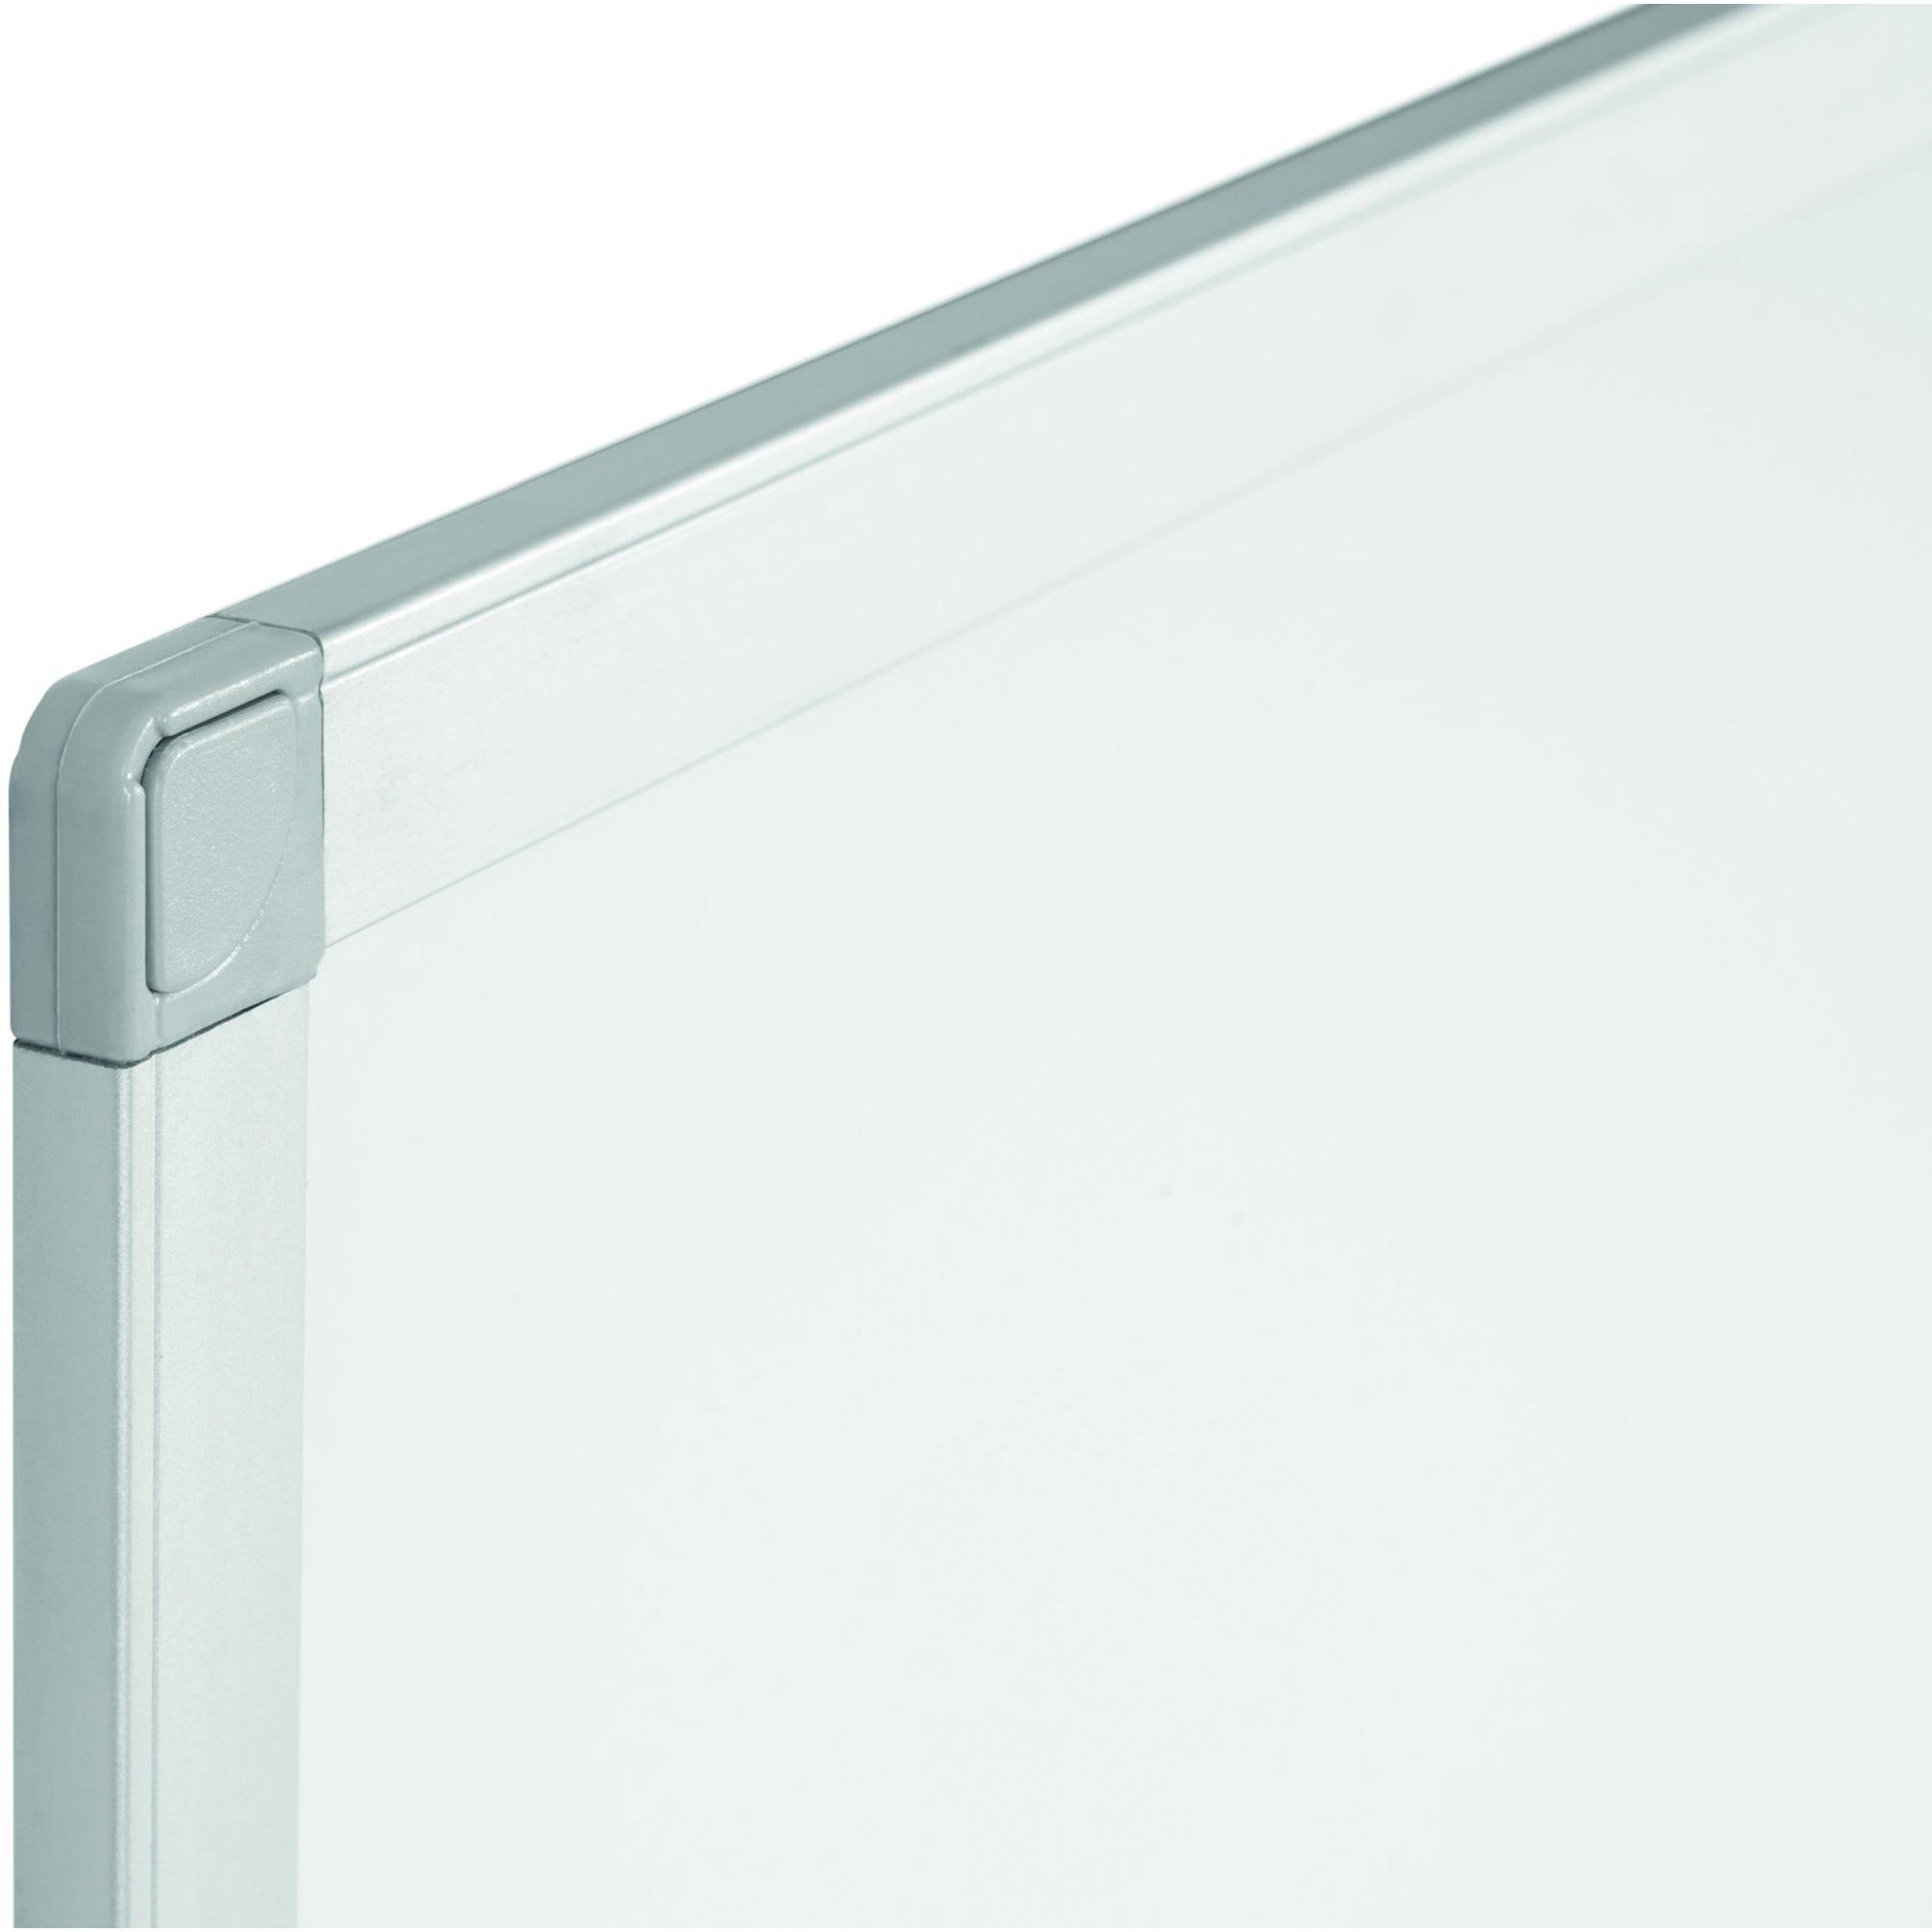 bi-silque-ayda-steel-dry-erase-board-24-2-ft-width-x-18-15-ft-height-white-steel-surface-aluminum-frame-rectangle-horizontal-vertical-magnetic-1-each_bvcma02759214 - 3